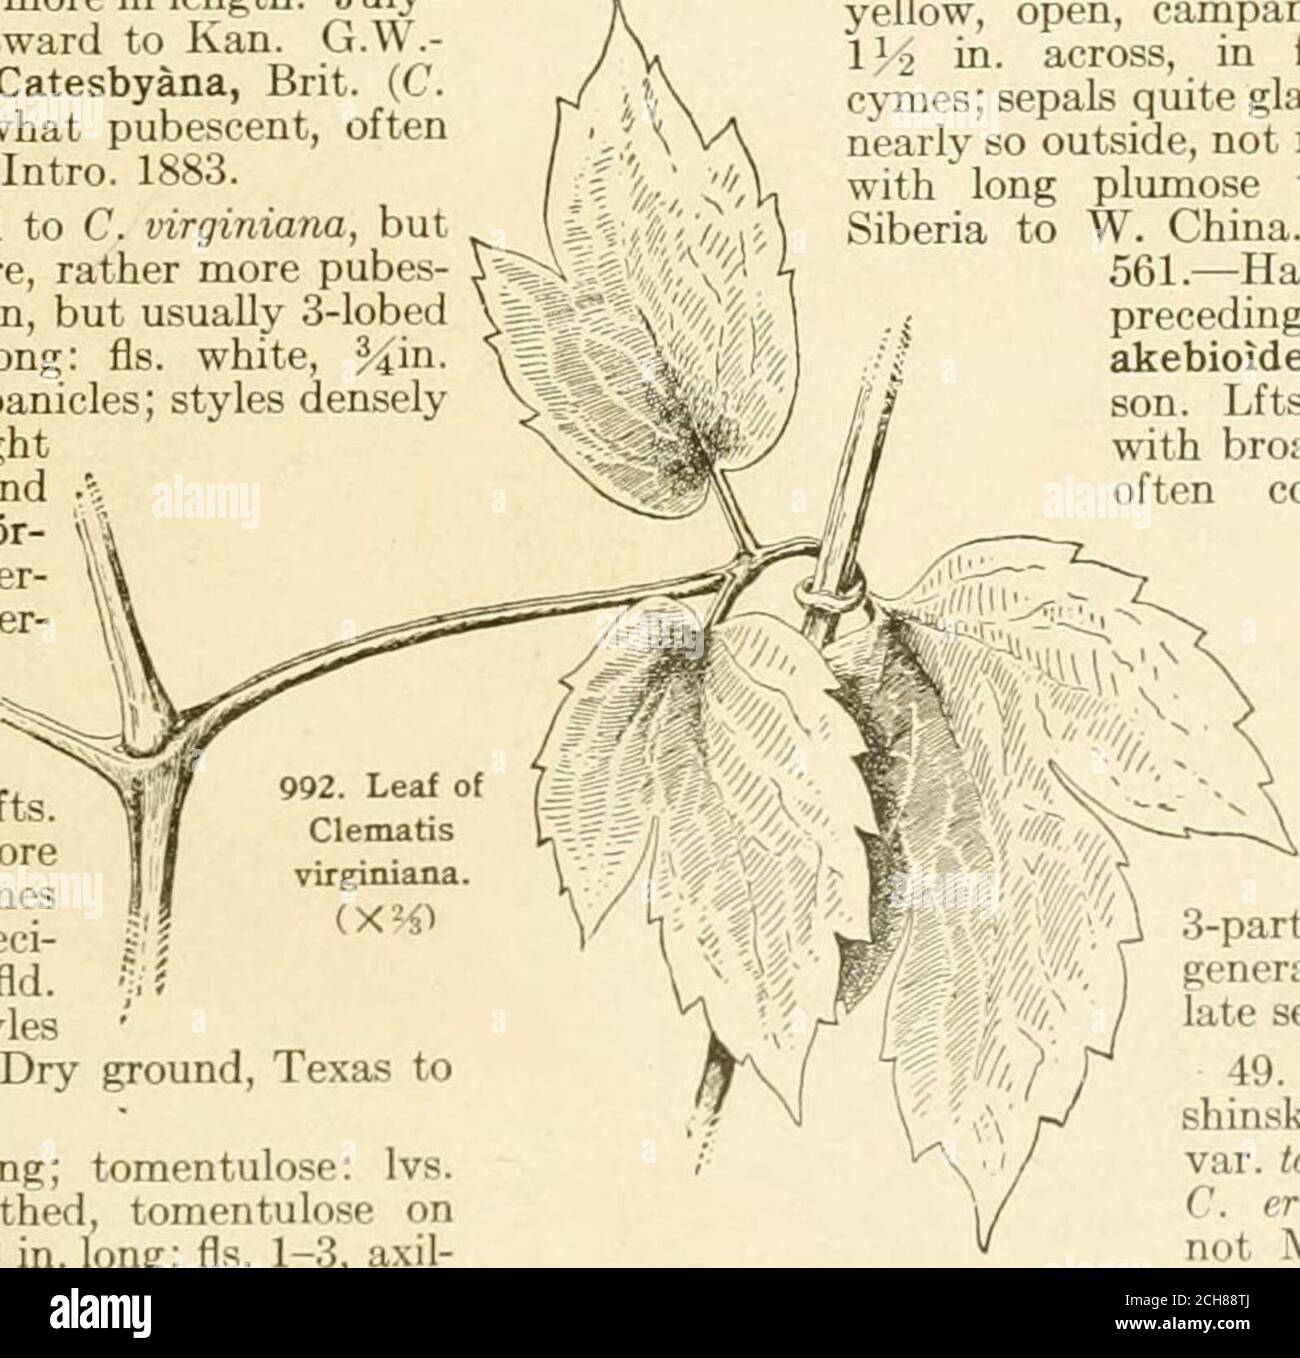 . The standard cyclopedia of horticulture; a discussion, for the amateur, and the professional and commercial grower, of the kinds, characteristics and methods of cultivation of the species of plants grown in the regions of the United States and Canada for ornament, for fancy, for fruit and for vegetables; with keys to the natural families and genera, descriptions of the horticultural capabilities of the states and provinces and dependent islands, and sketches of eminent horticulturists . F.S.4:3746 (pi. 336); 6:.548. R.H. 1855:321; 1899, p.530. J.F. 2:128. P.F.G. 2, p. 67. Gng. 5:227.V. 3:362 Stock Photo